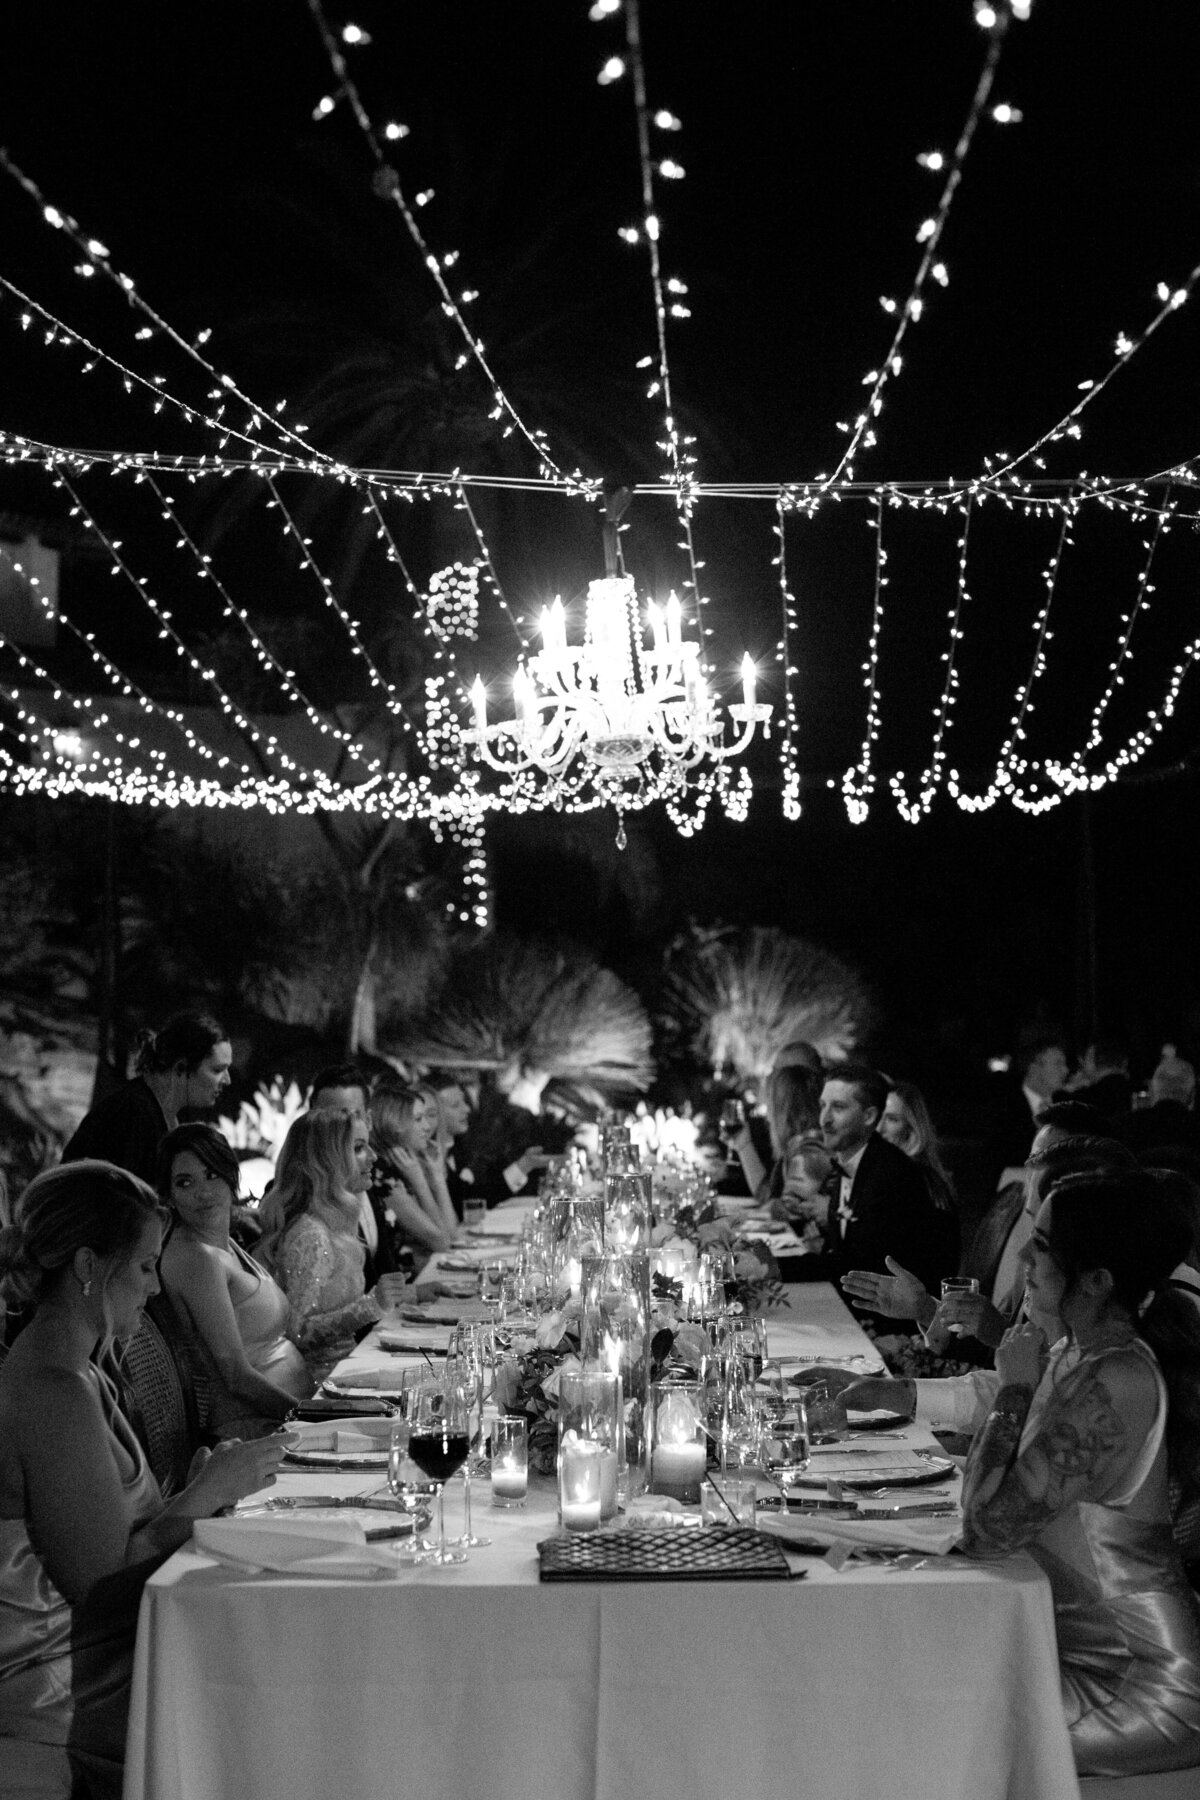 A reception table under string lights at nighttime with everyone engaging in conversation.